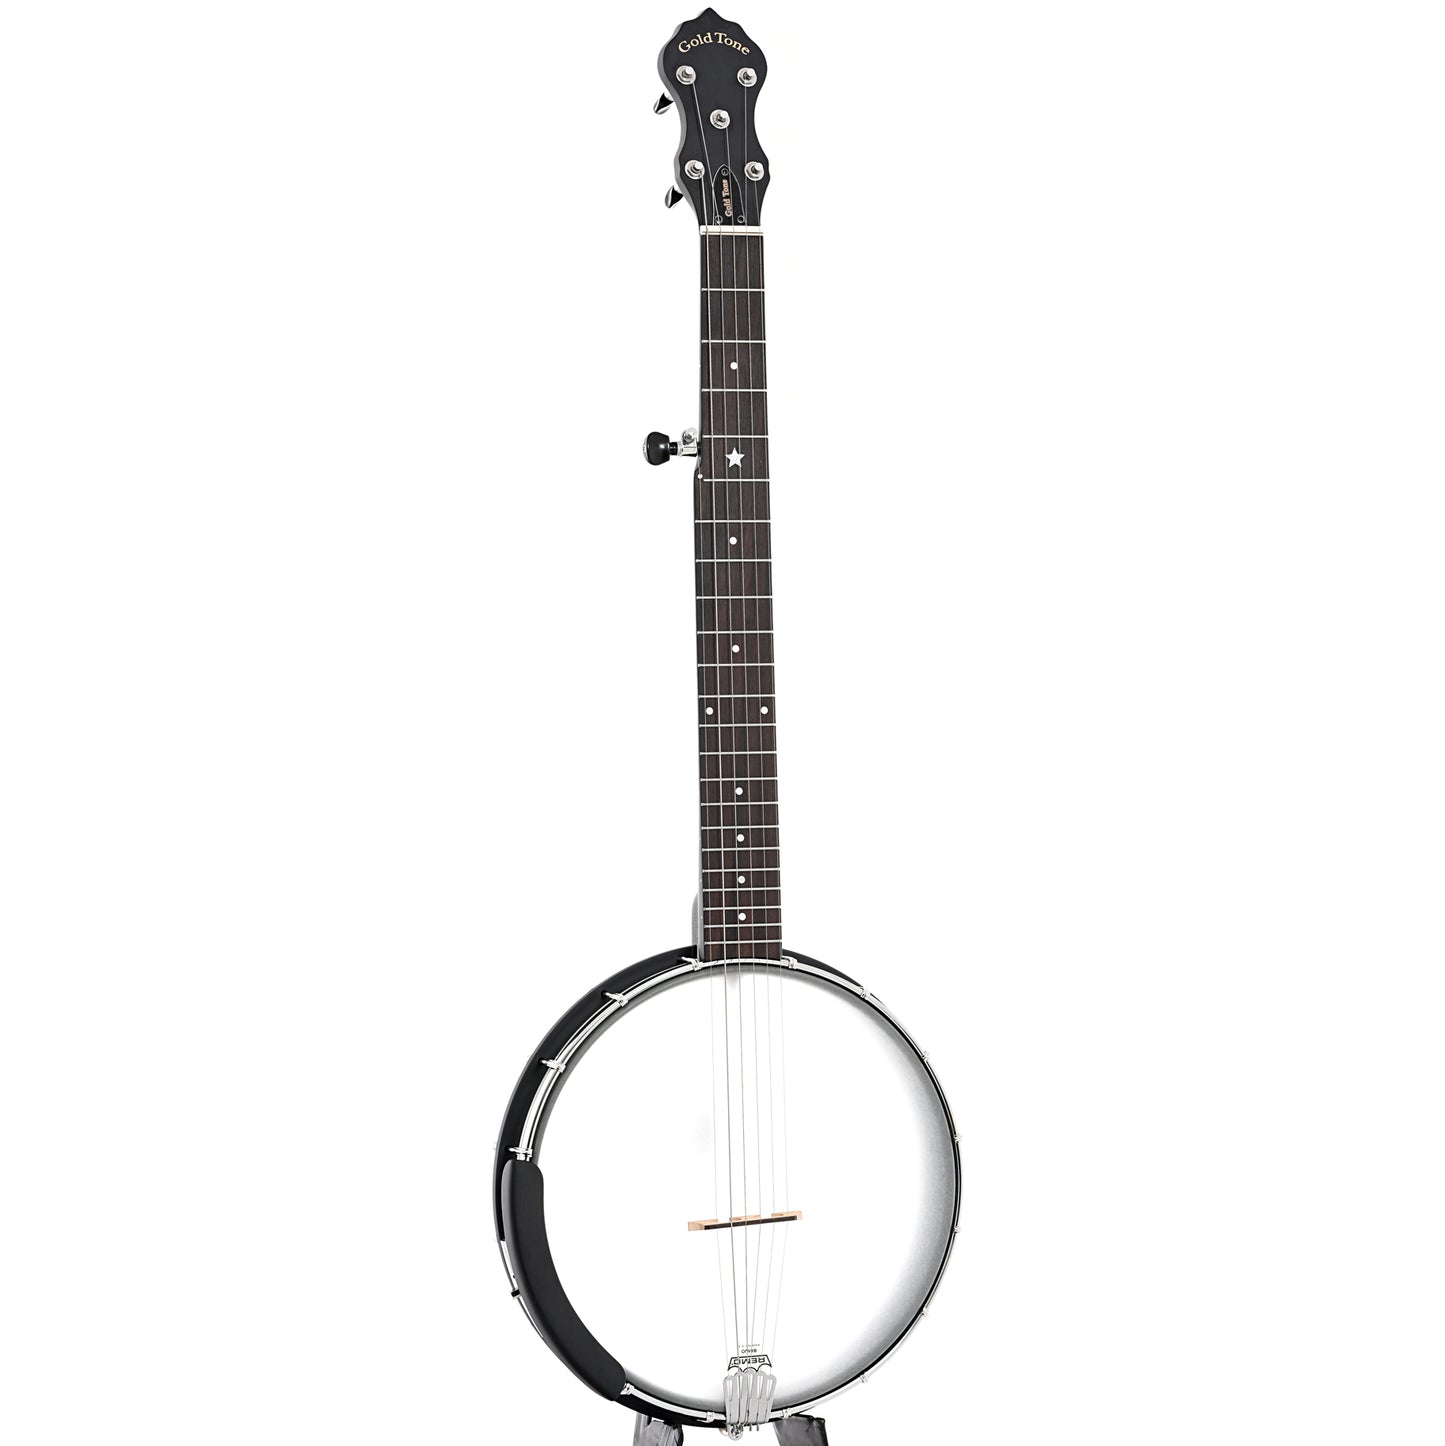 Full front and side of Gold Tone AC-5+1 Openback Banjo